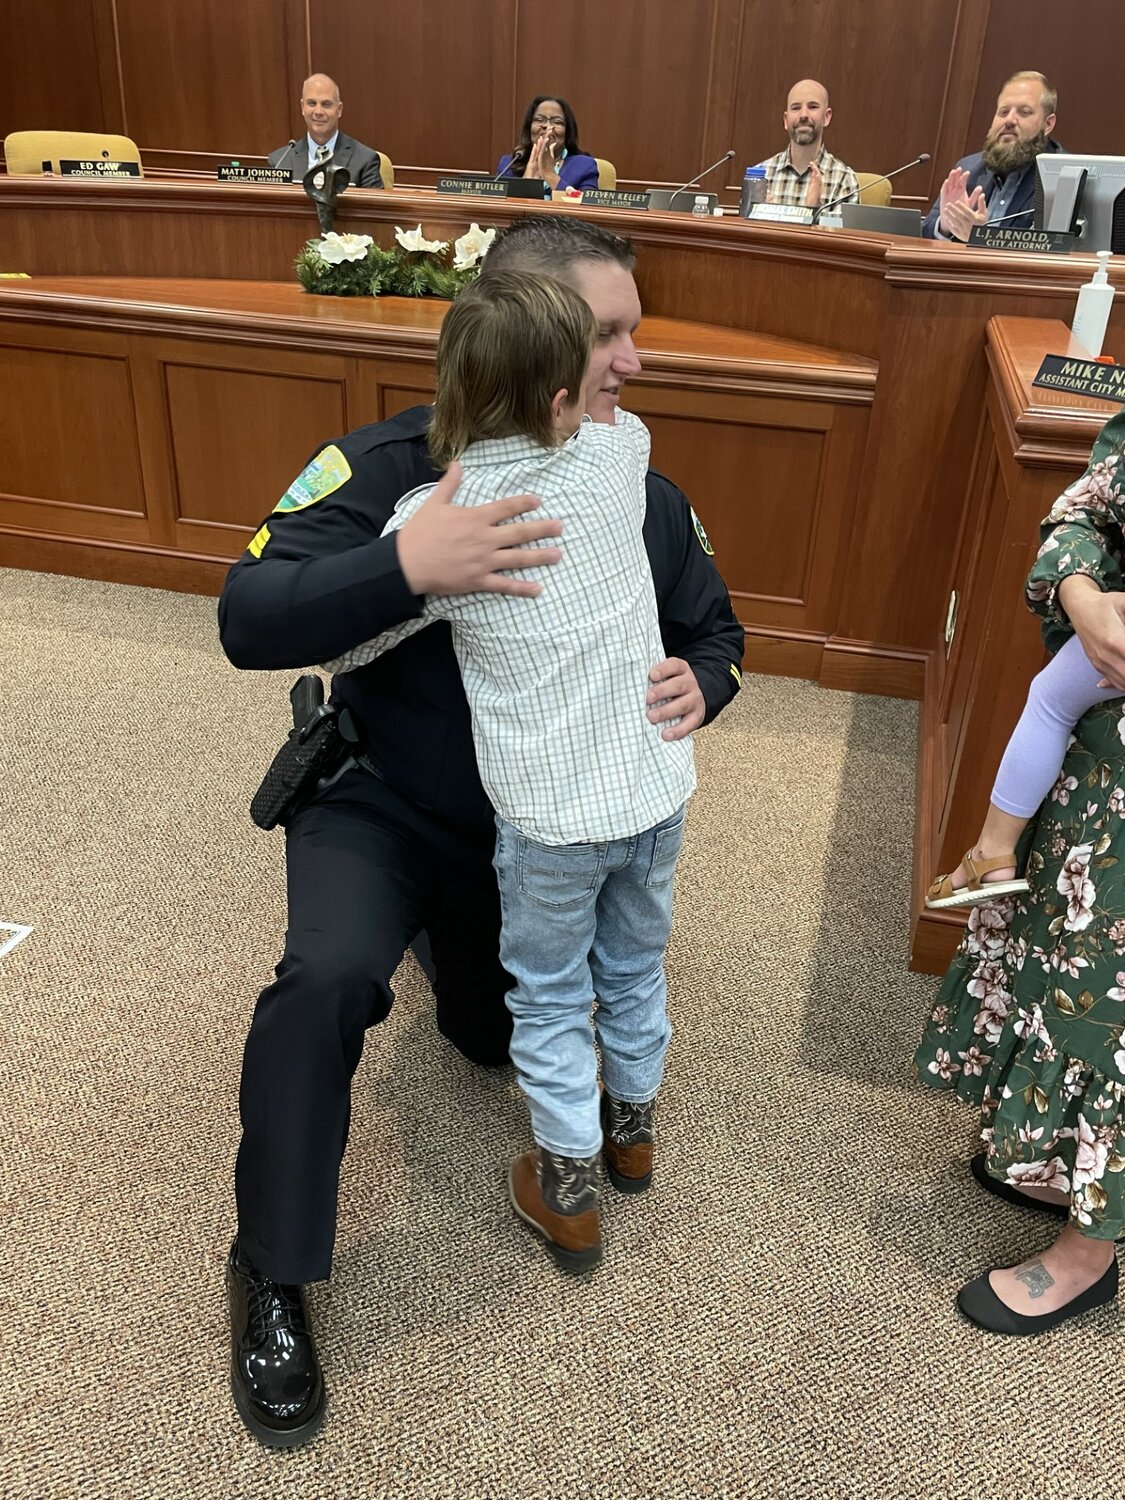 Sergeant Brett Morando hugged his son after his badge was pinned on.